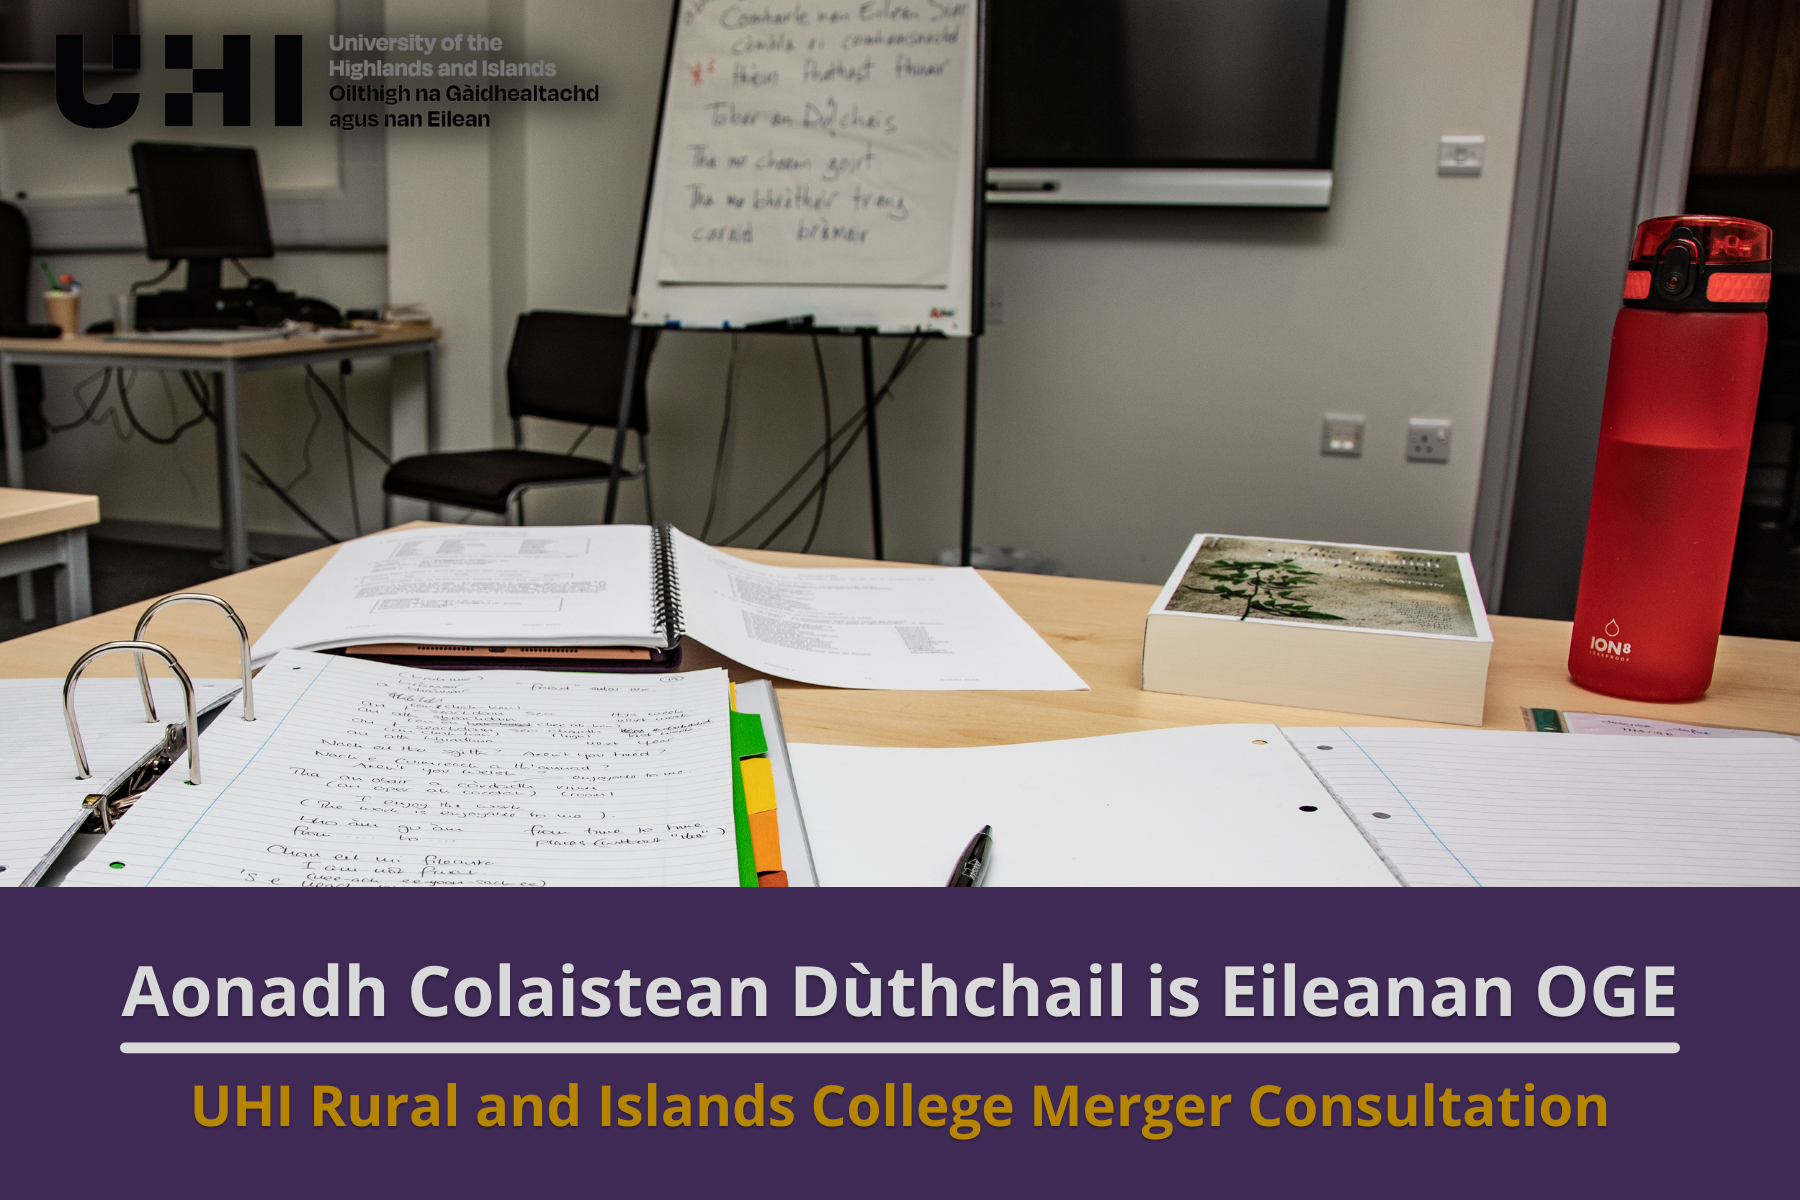 UHI Rural and Islands College Merger Consultation